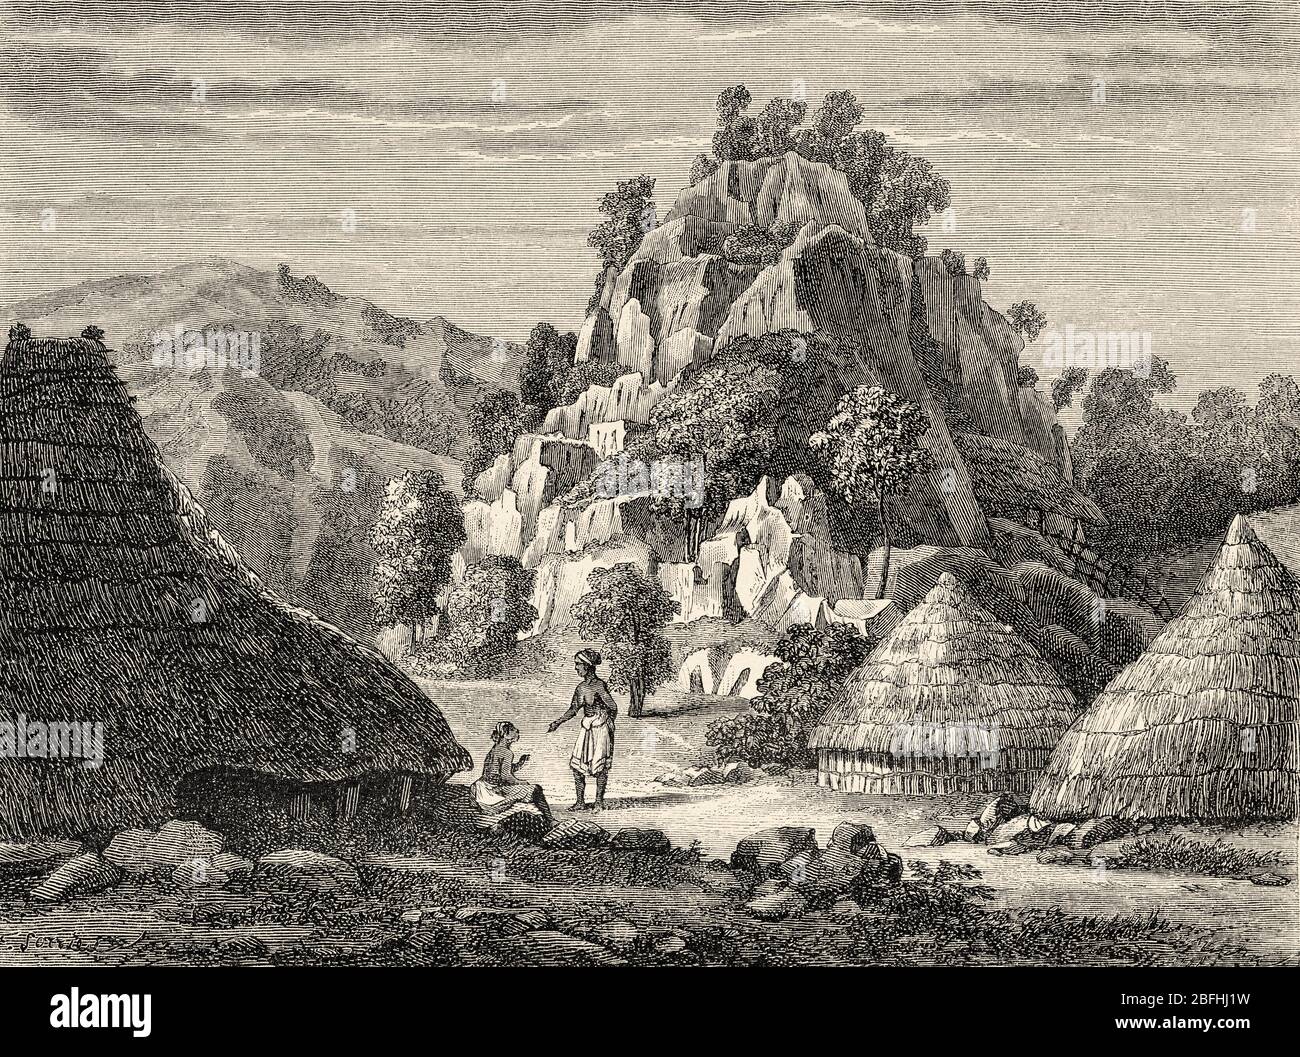 Landscape of Timor island, Indonesia, Asia. Old engraving illustration, The Malay Archipelago by Alfred Russell Wallace Stock Photo